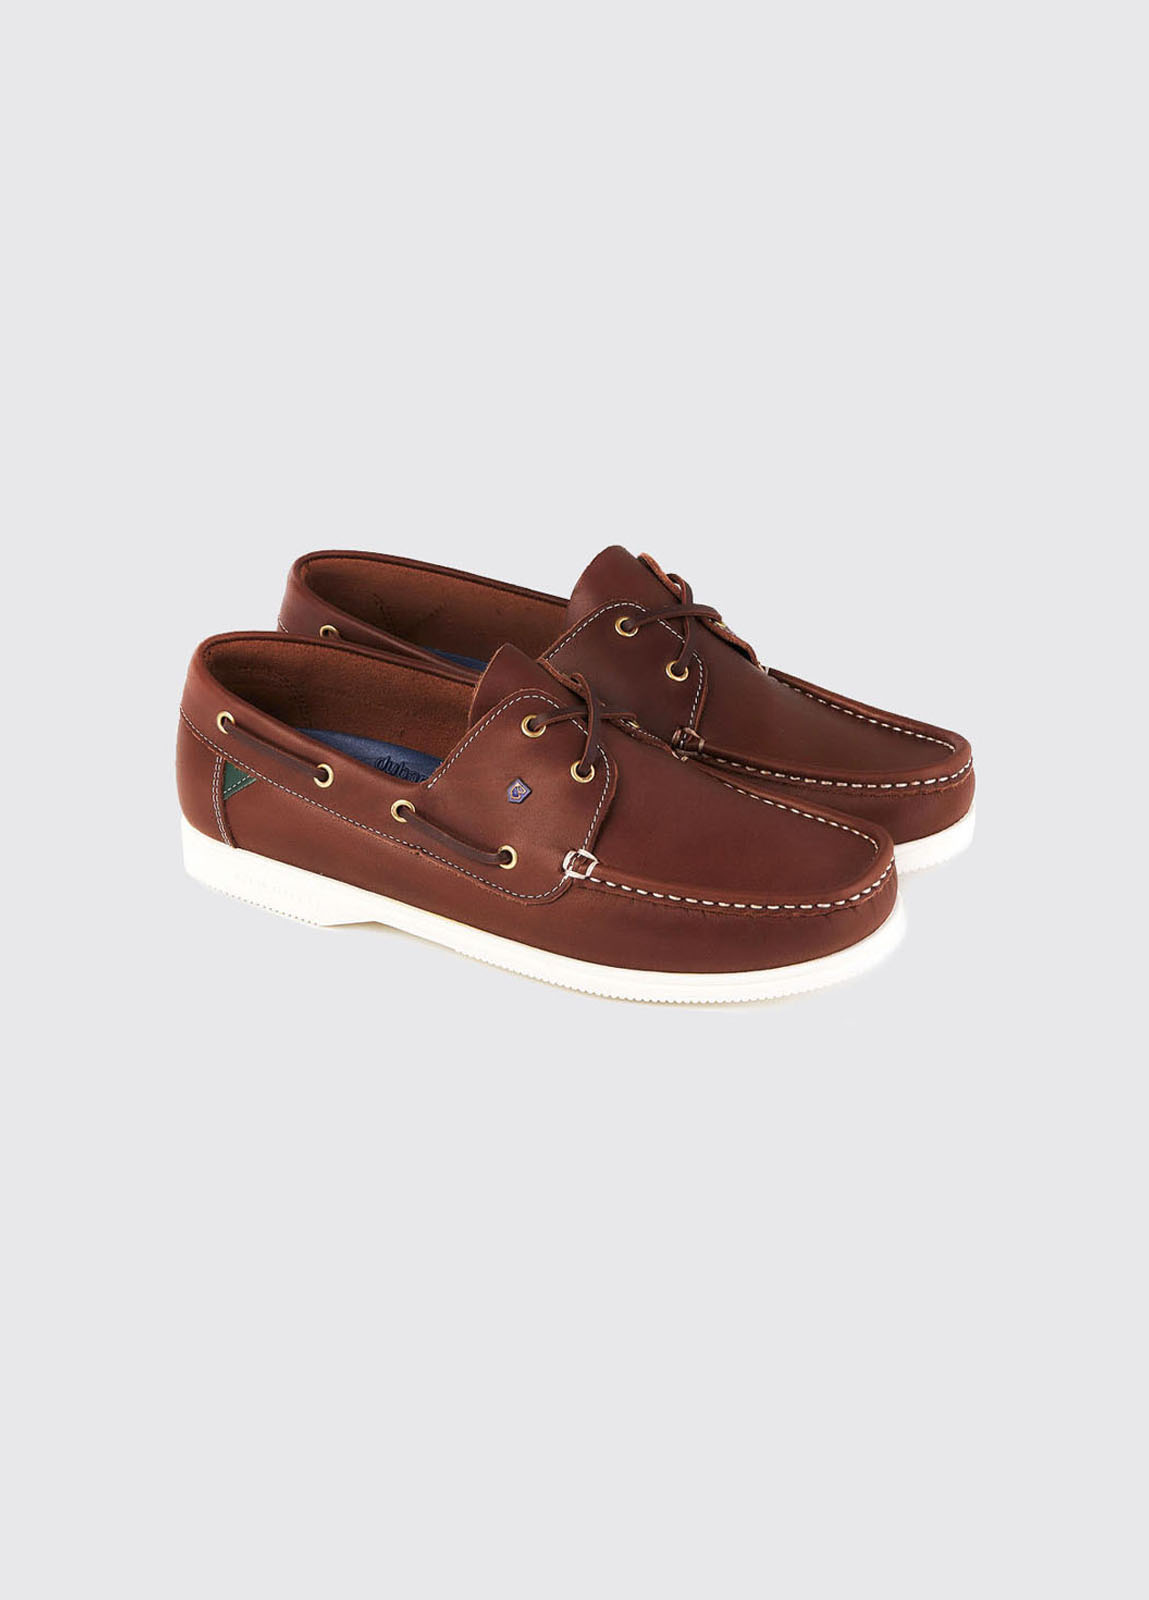 Ladies Deck & Boat Shoes from £99 | Dubarry Boots